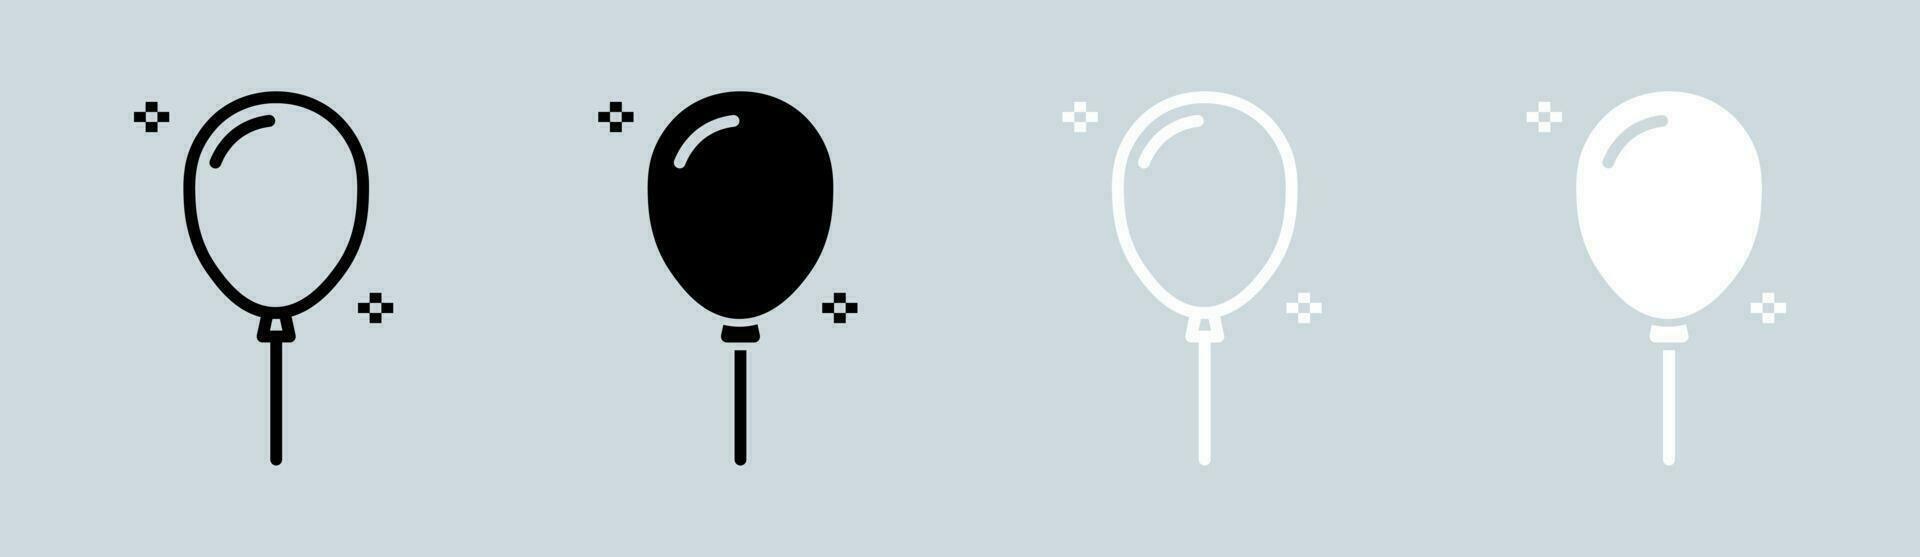 Balloon icon set in black and white. Decoration signs vector illustration.